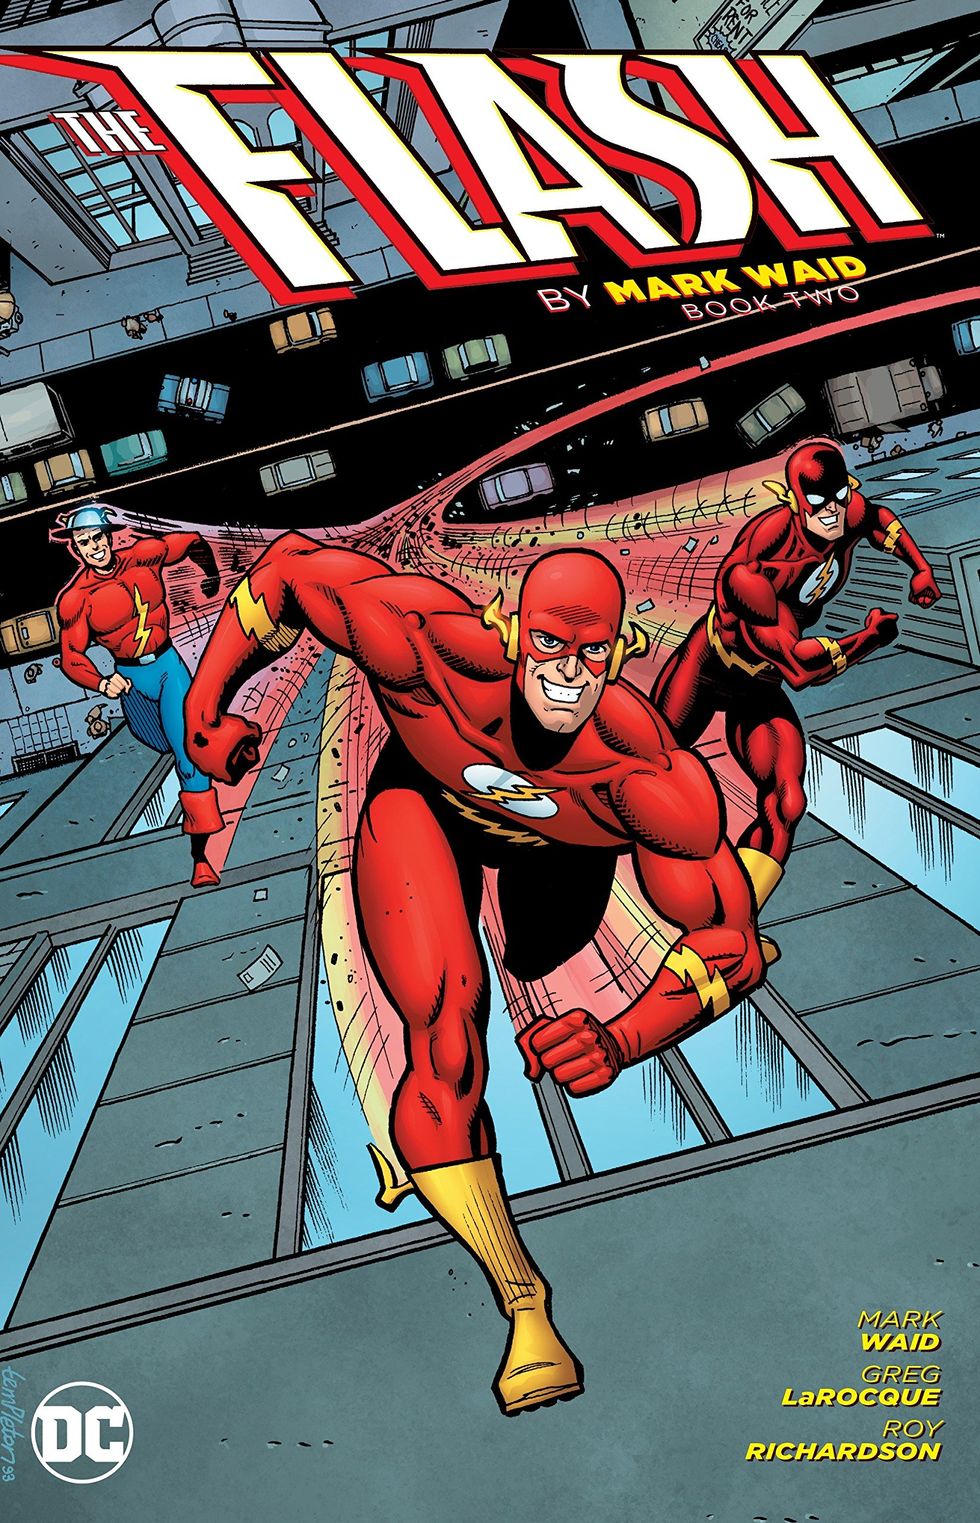 The Return of Barry Allen (The Flash #74 - 79, 1993)